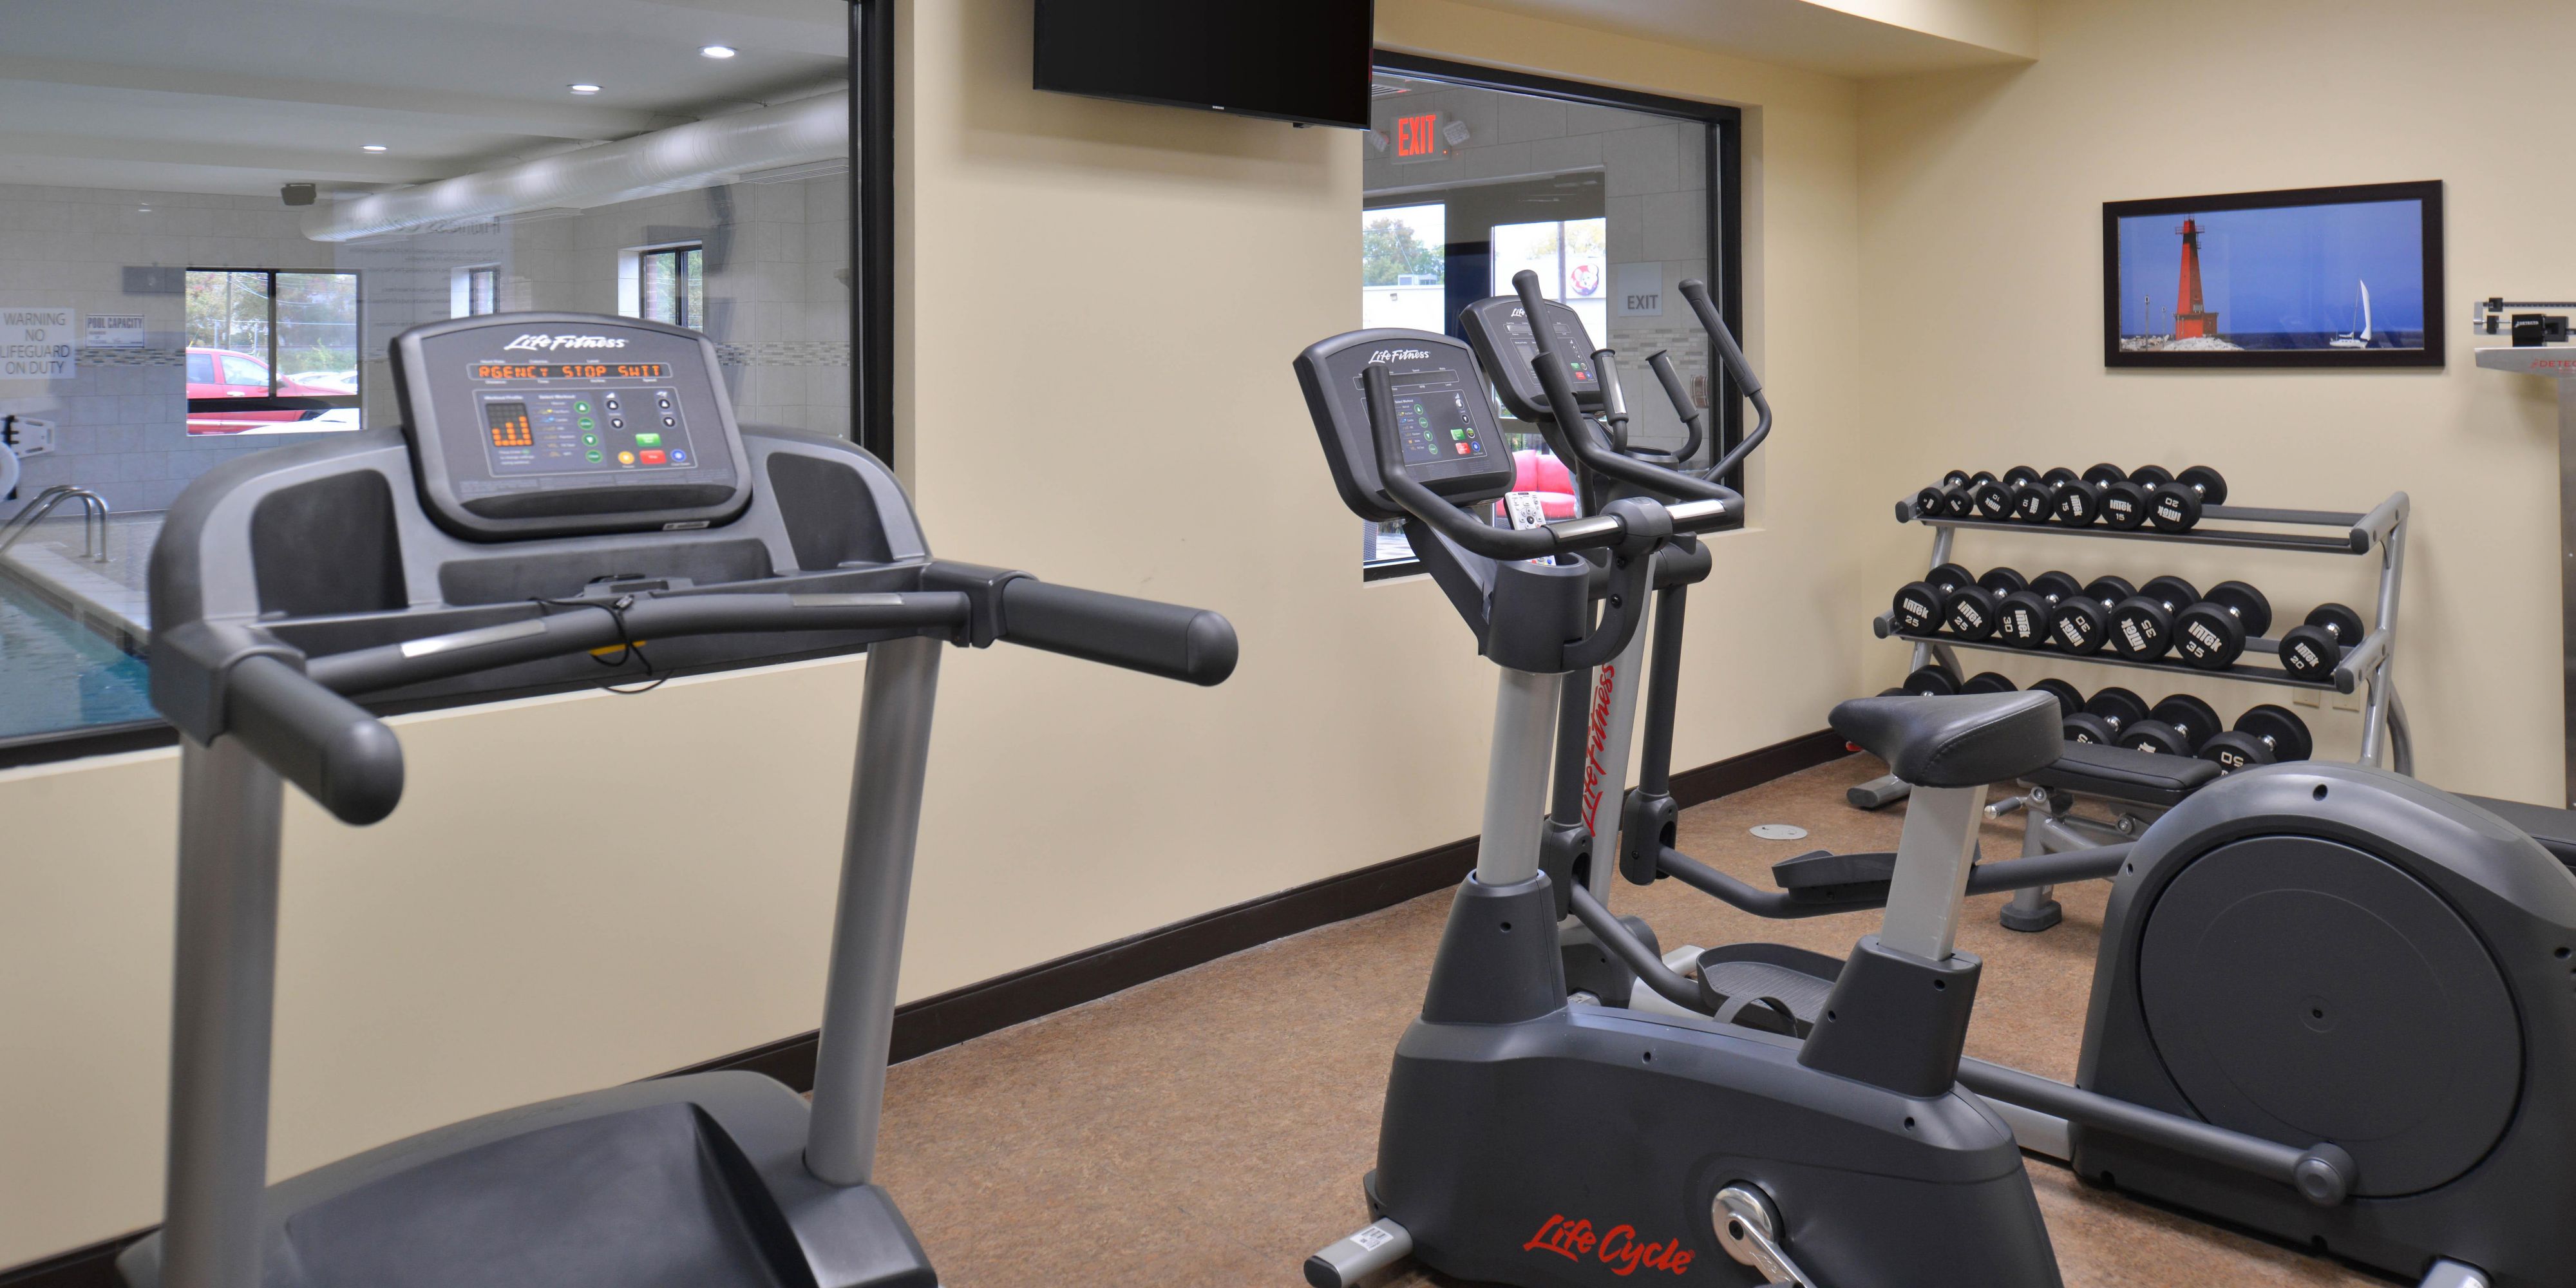 Our fitness center is open all day and every day so there is plenty of time to fit in your routine when staying with us.